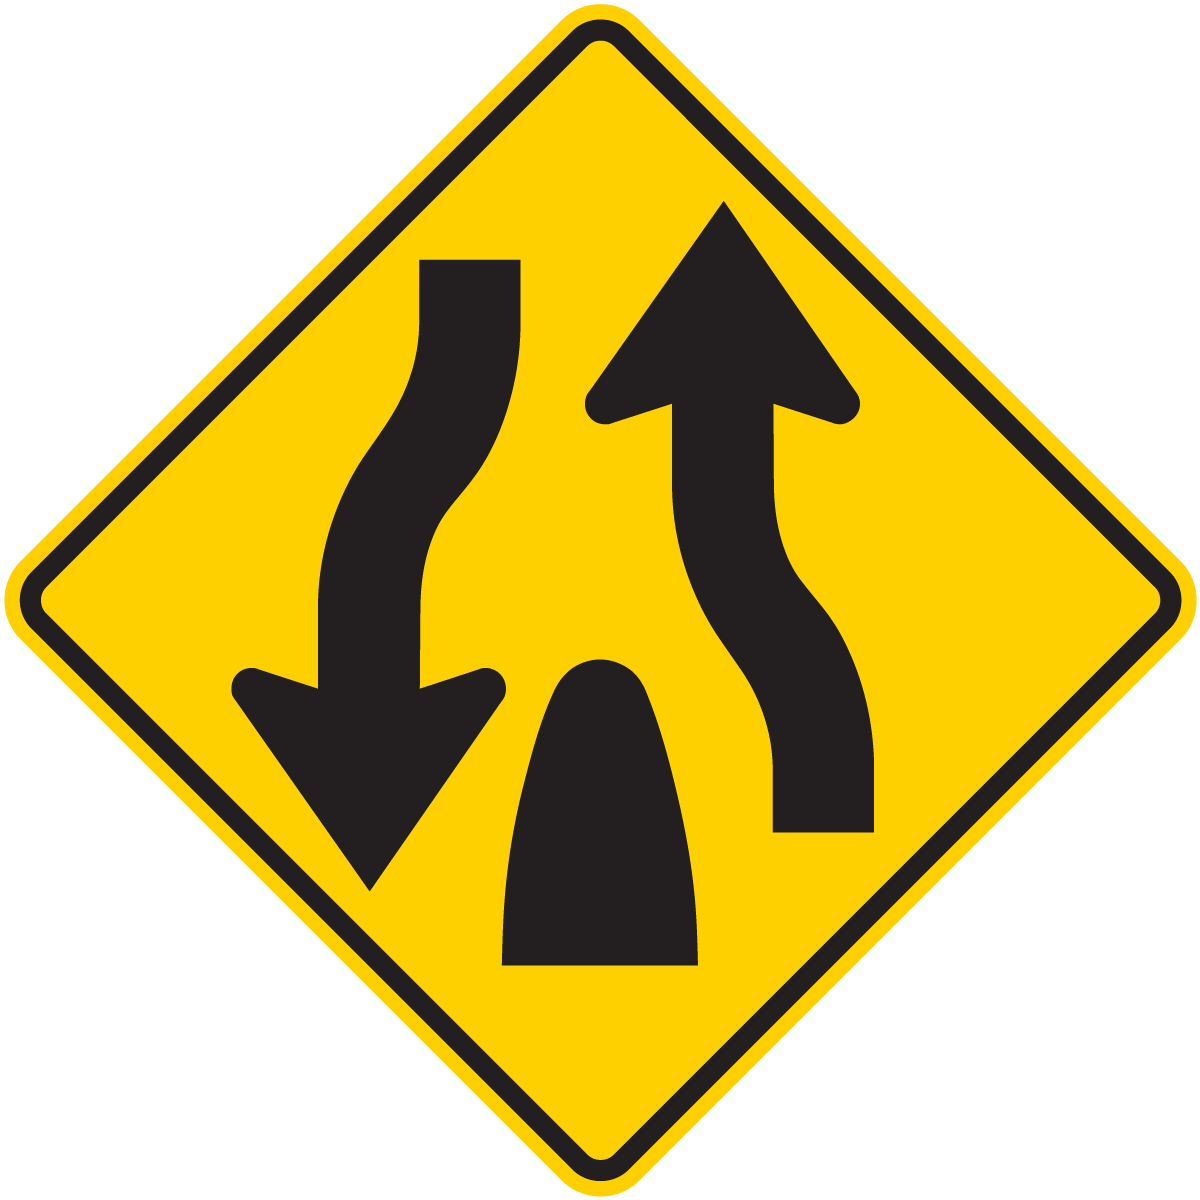 W6-2 Divided Highway Ends